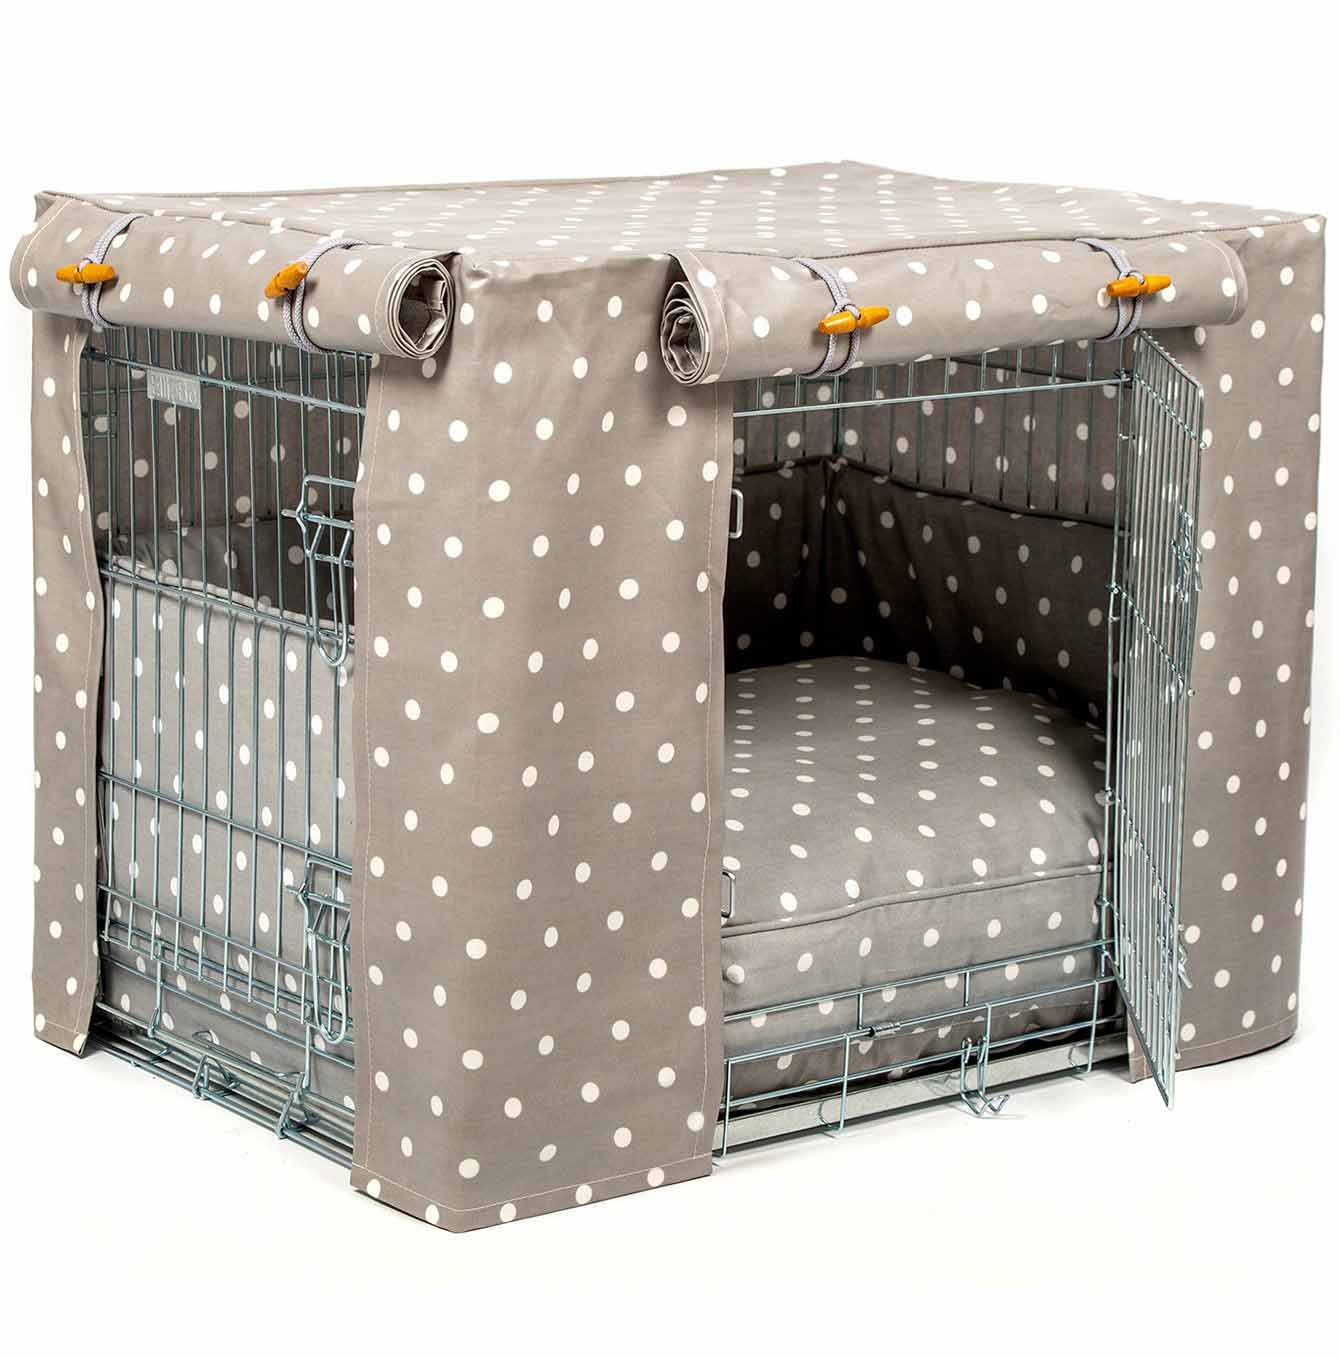 Luxury Silver Dog Cage Set With Cushion, Bumper and Cage Cover. The Perfect Dog Cage For The Ultimate Naptime, Available Now at Lords & Labradors US